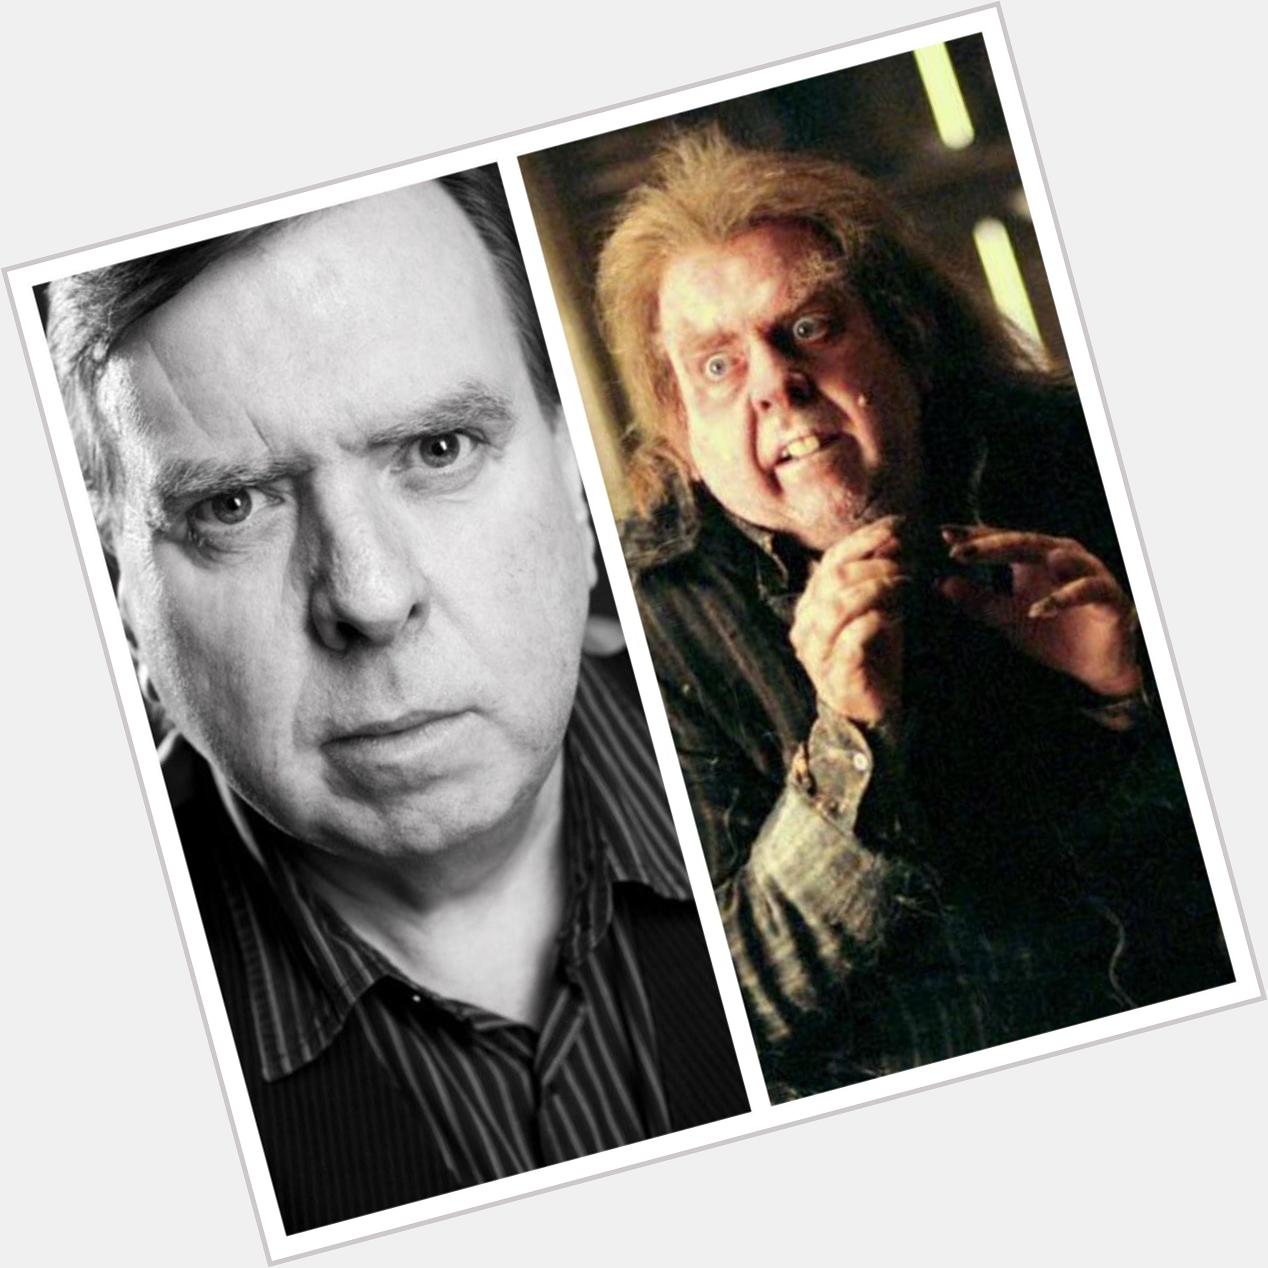 Feb. 27: Happy Birthday, Timothy Spall! He played Peter Pettigrew in the films. 